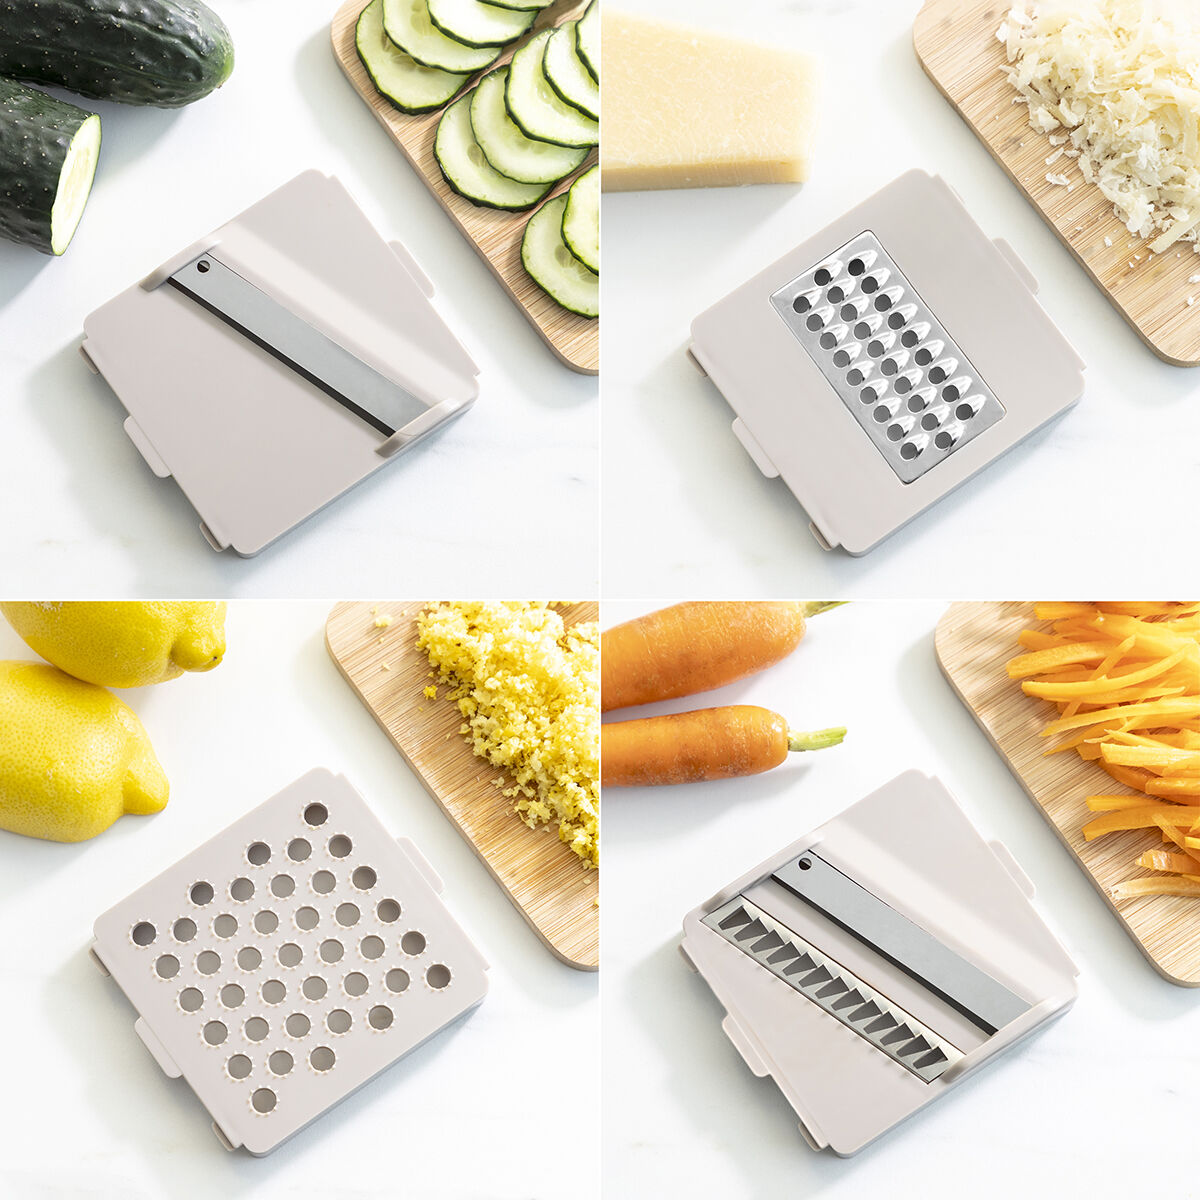 7 in 1 vegetable cutter, grater and mandolin